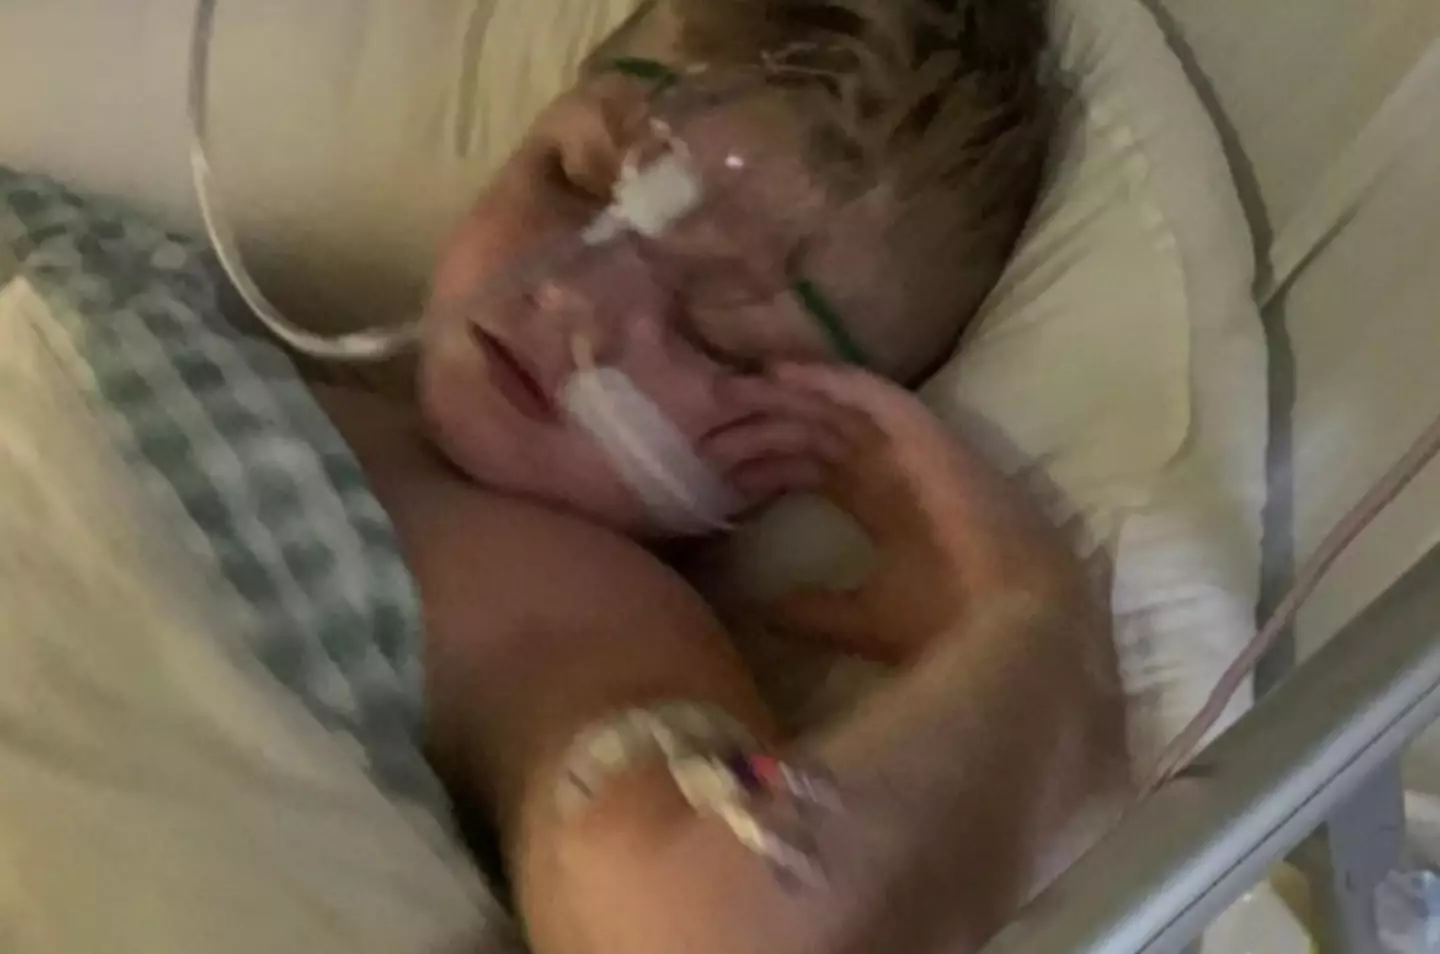 Marley was rushed to hospital when he started to struggle to breathe.